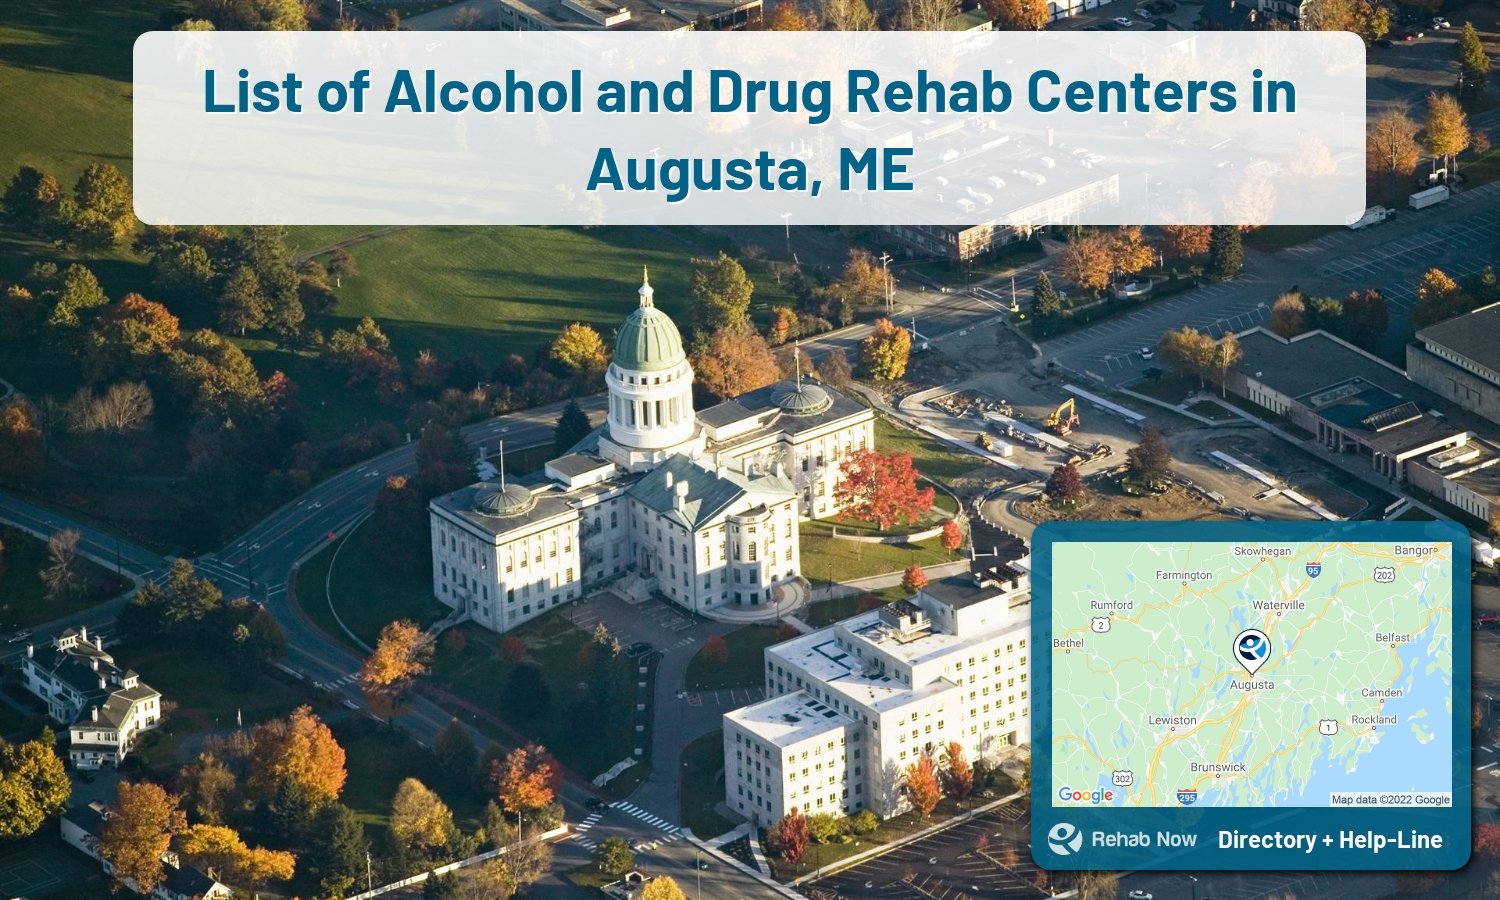 View options, availability, treatment methods, and more, for drug rehab and alcohol treatment in Augusta, Maine